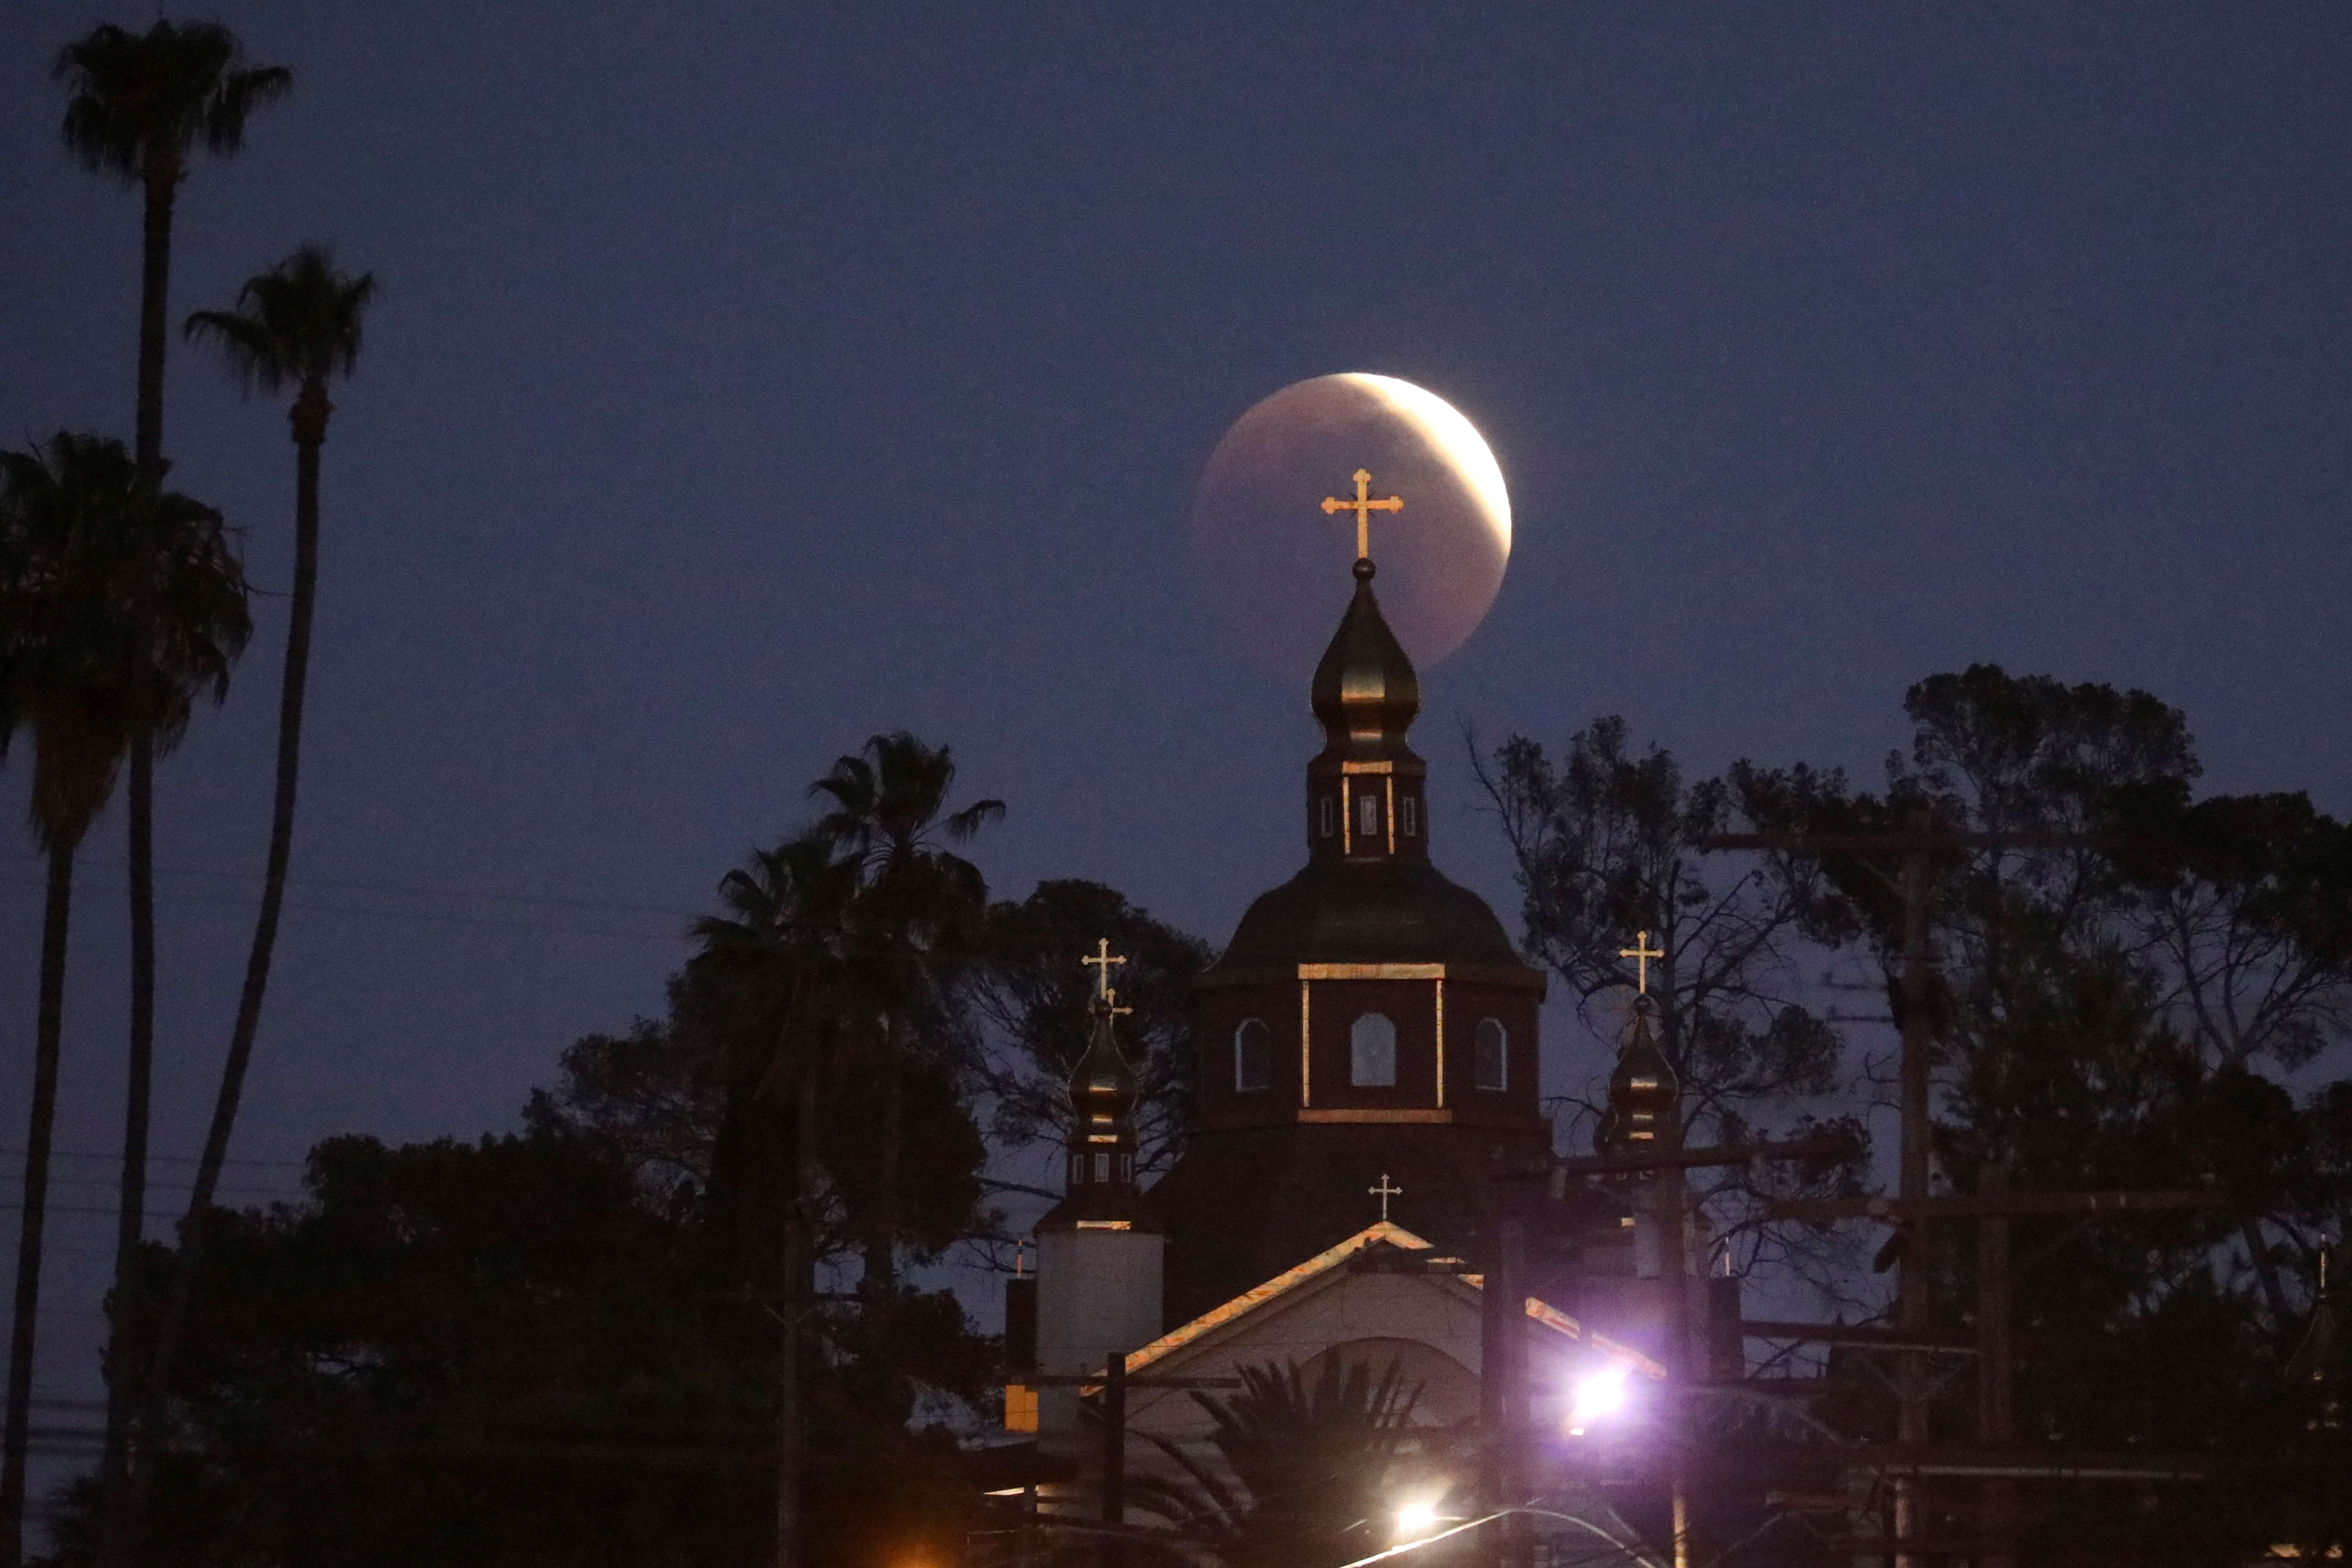 Andrew's Orthodox Church is seen as the Moon moves into Earth's shadow in Los Angeles, Calif. (REUTERS/David Swanson)